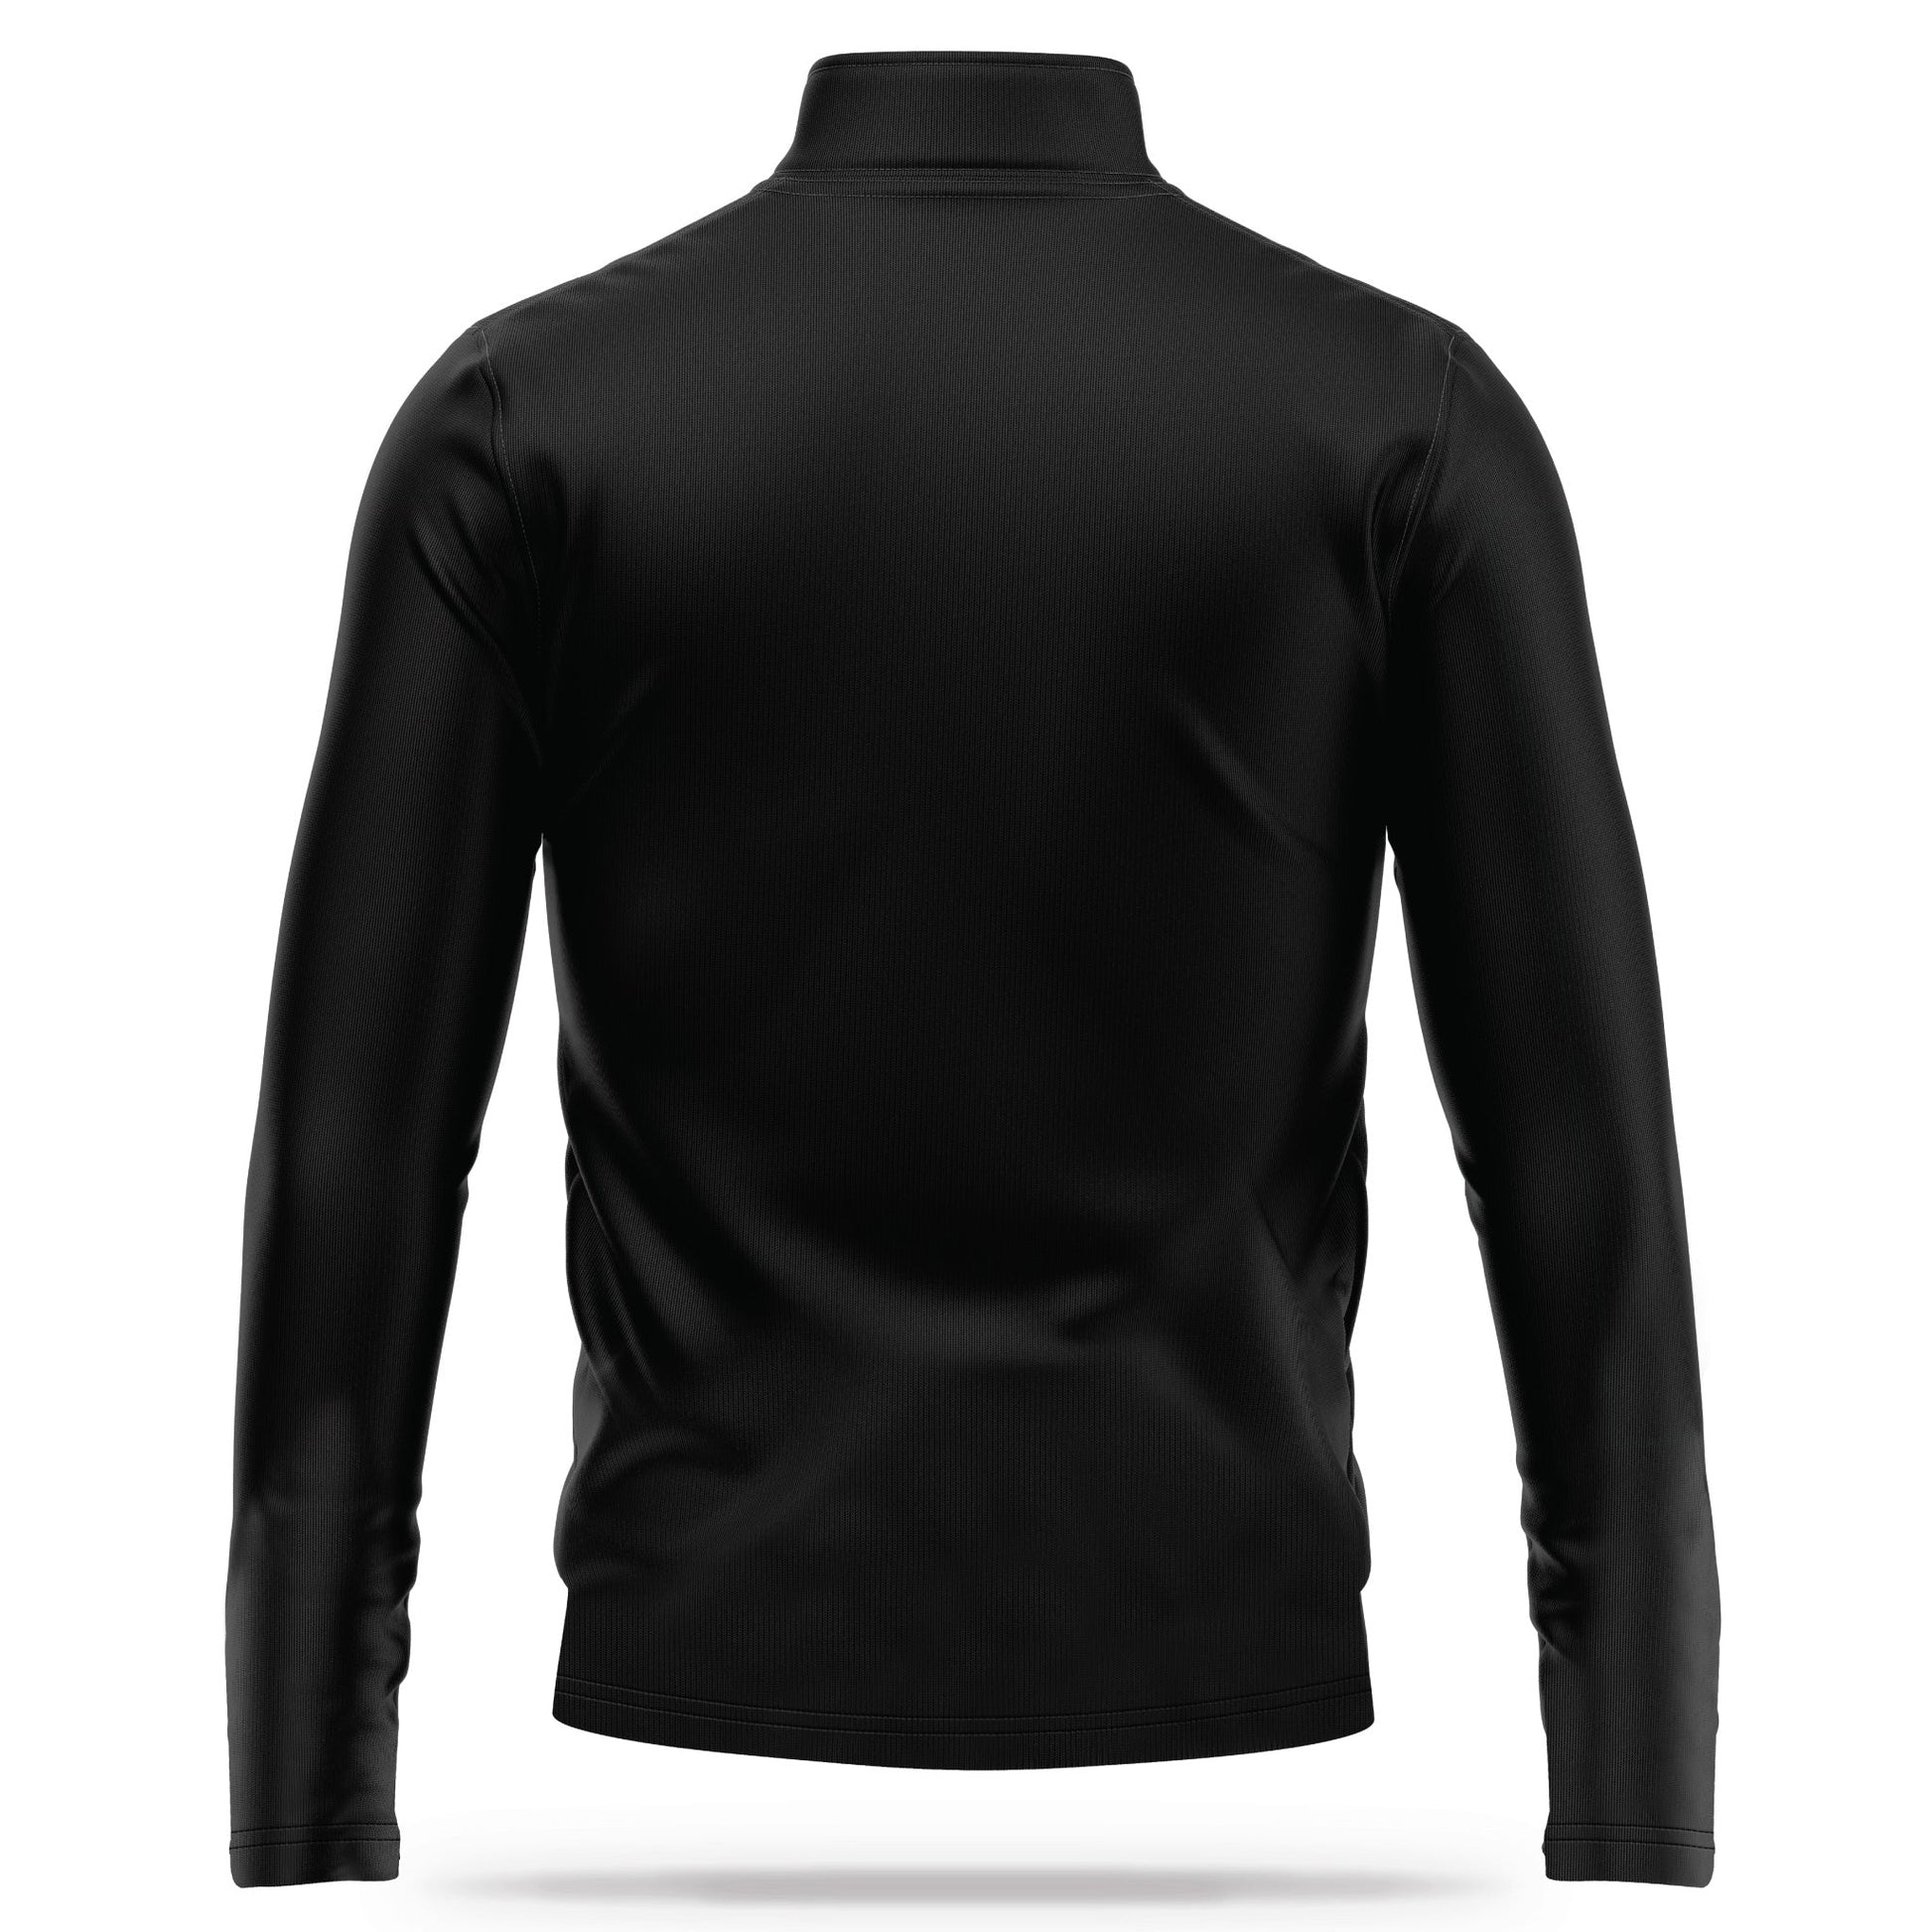 [POLICE] Performance Quarter Zip [BLK/GLD]-13 Fifty Apparel